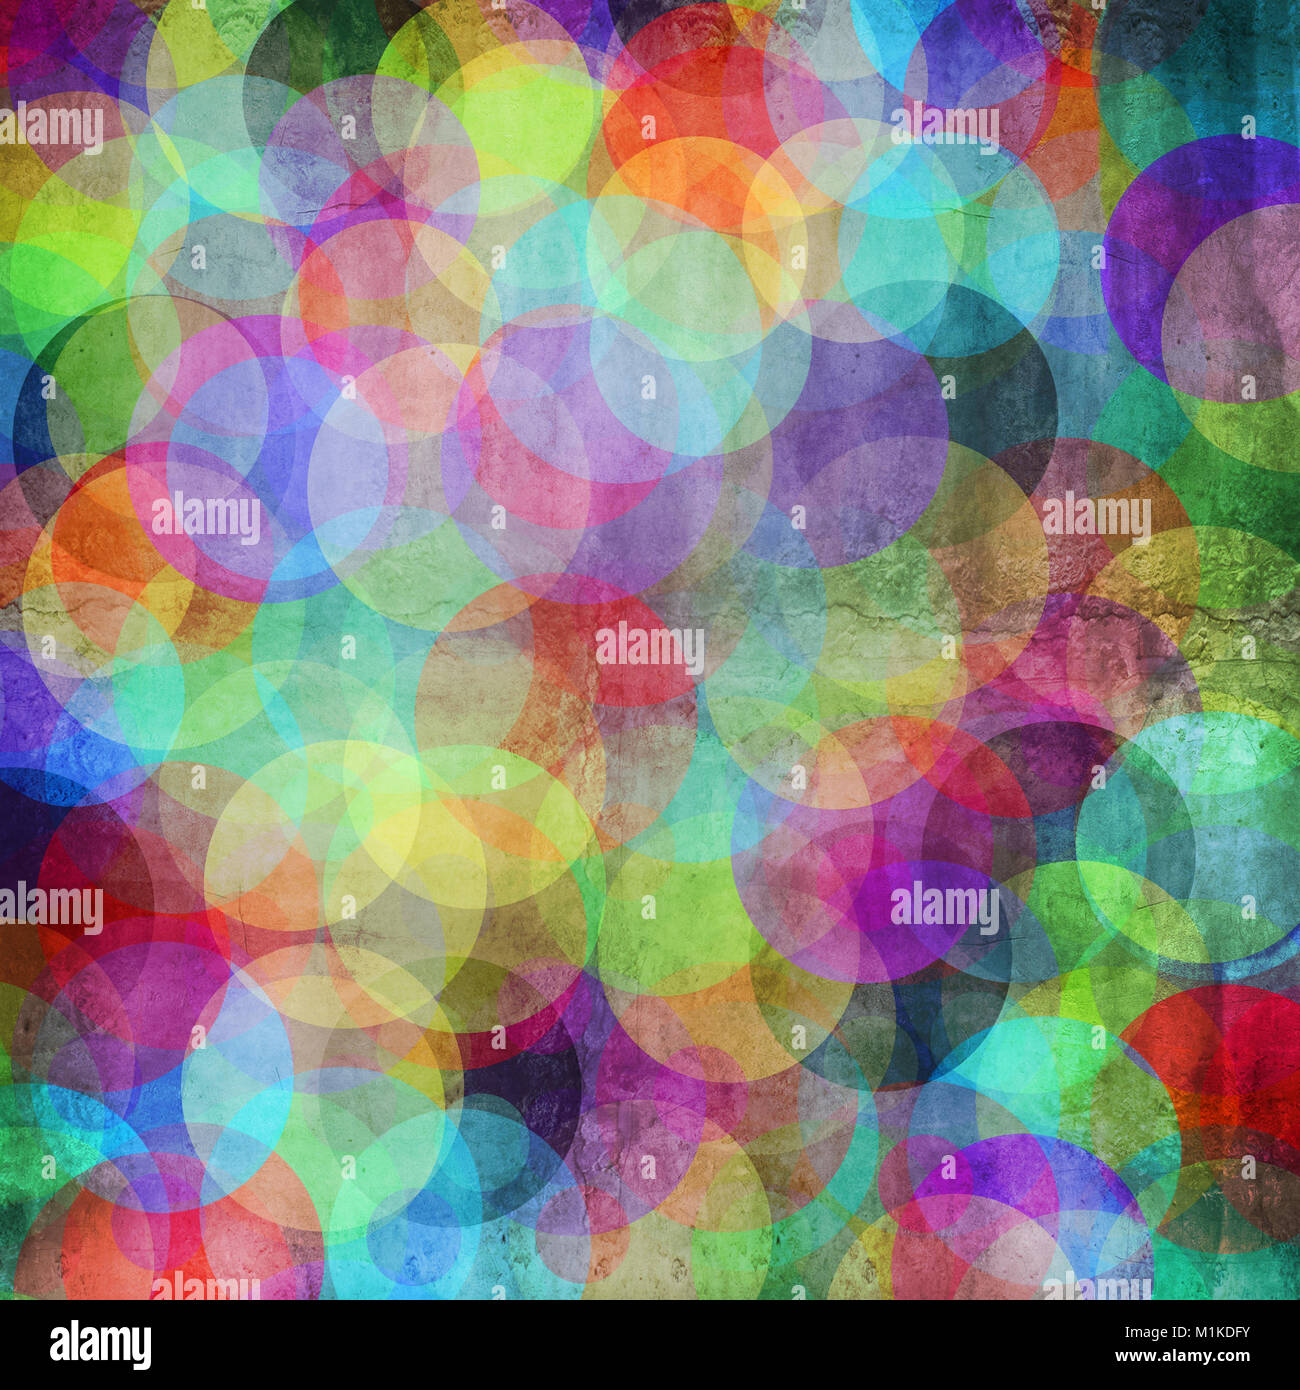 Many vivid color circles on a grunge background Stock Photo